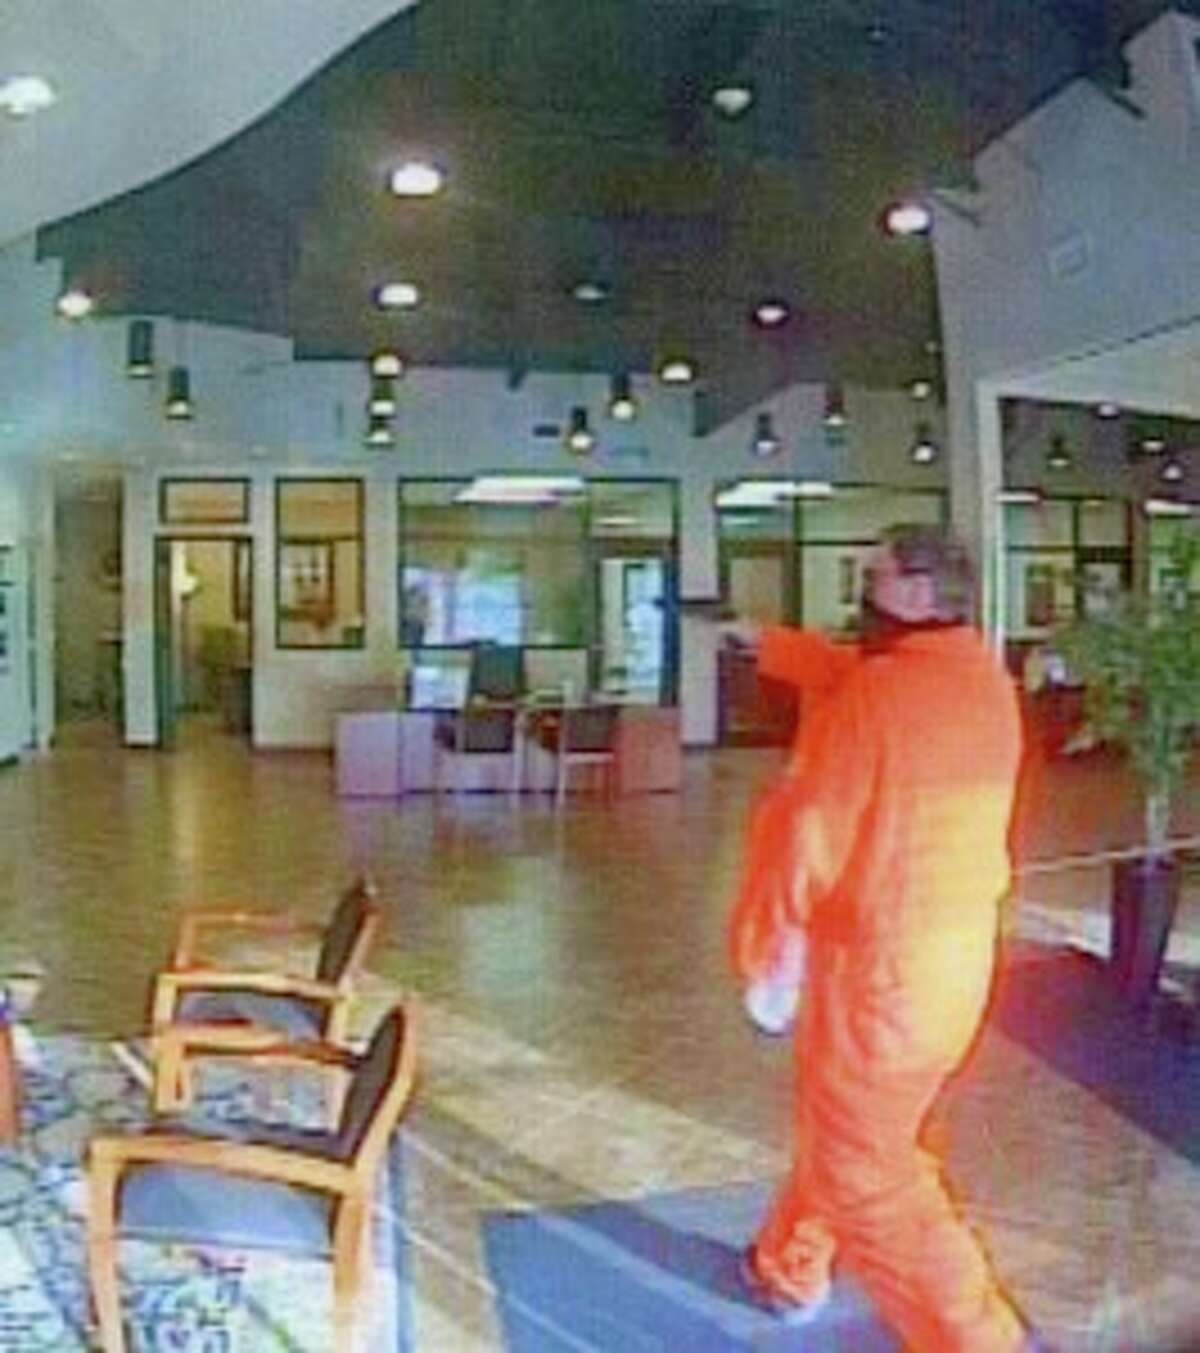 Beaumont Police released photos from Tuesday's attempted robbery at a bank in Beaumont's West End. Authorities are still searching for the suspect.